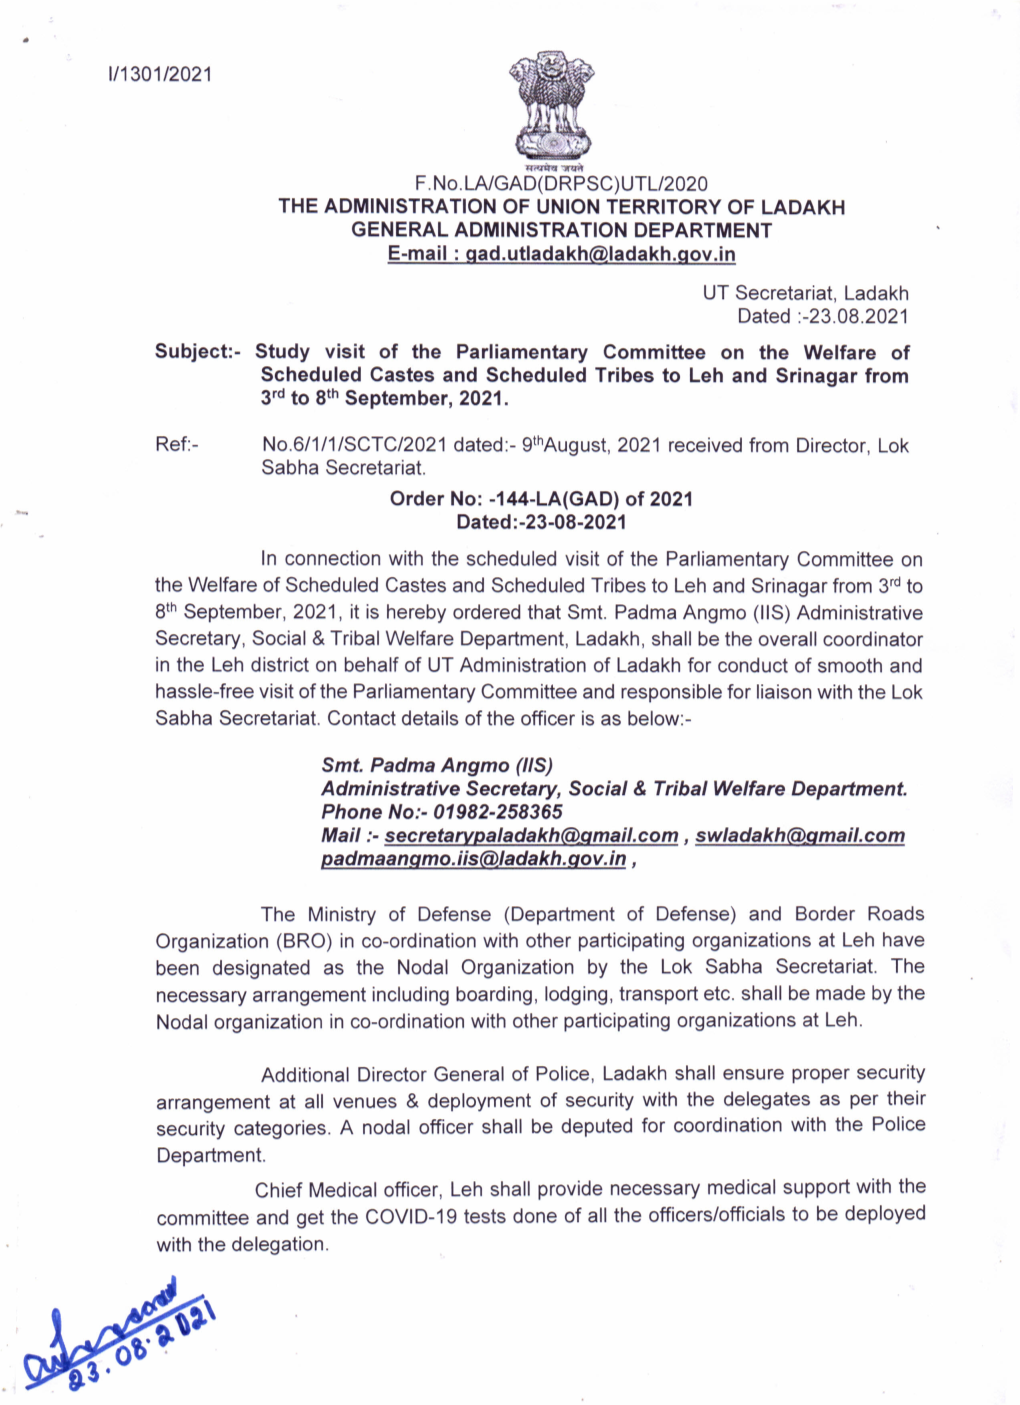 1/1301/2021 F.No.Lalgad(DRPSC)Utll2020 the ADMINISTRATION of UNION TERRITORY of LADAKH GENERAL ADMINISTRATION DEPARTMENT E-Mail